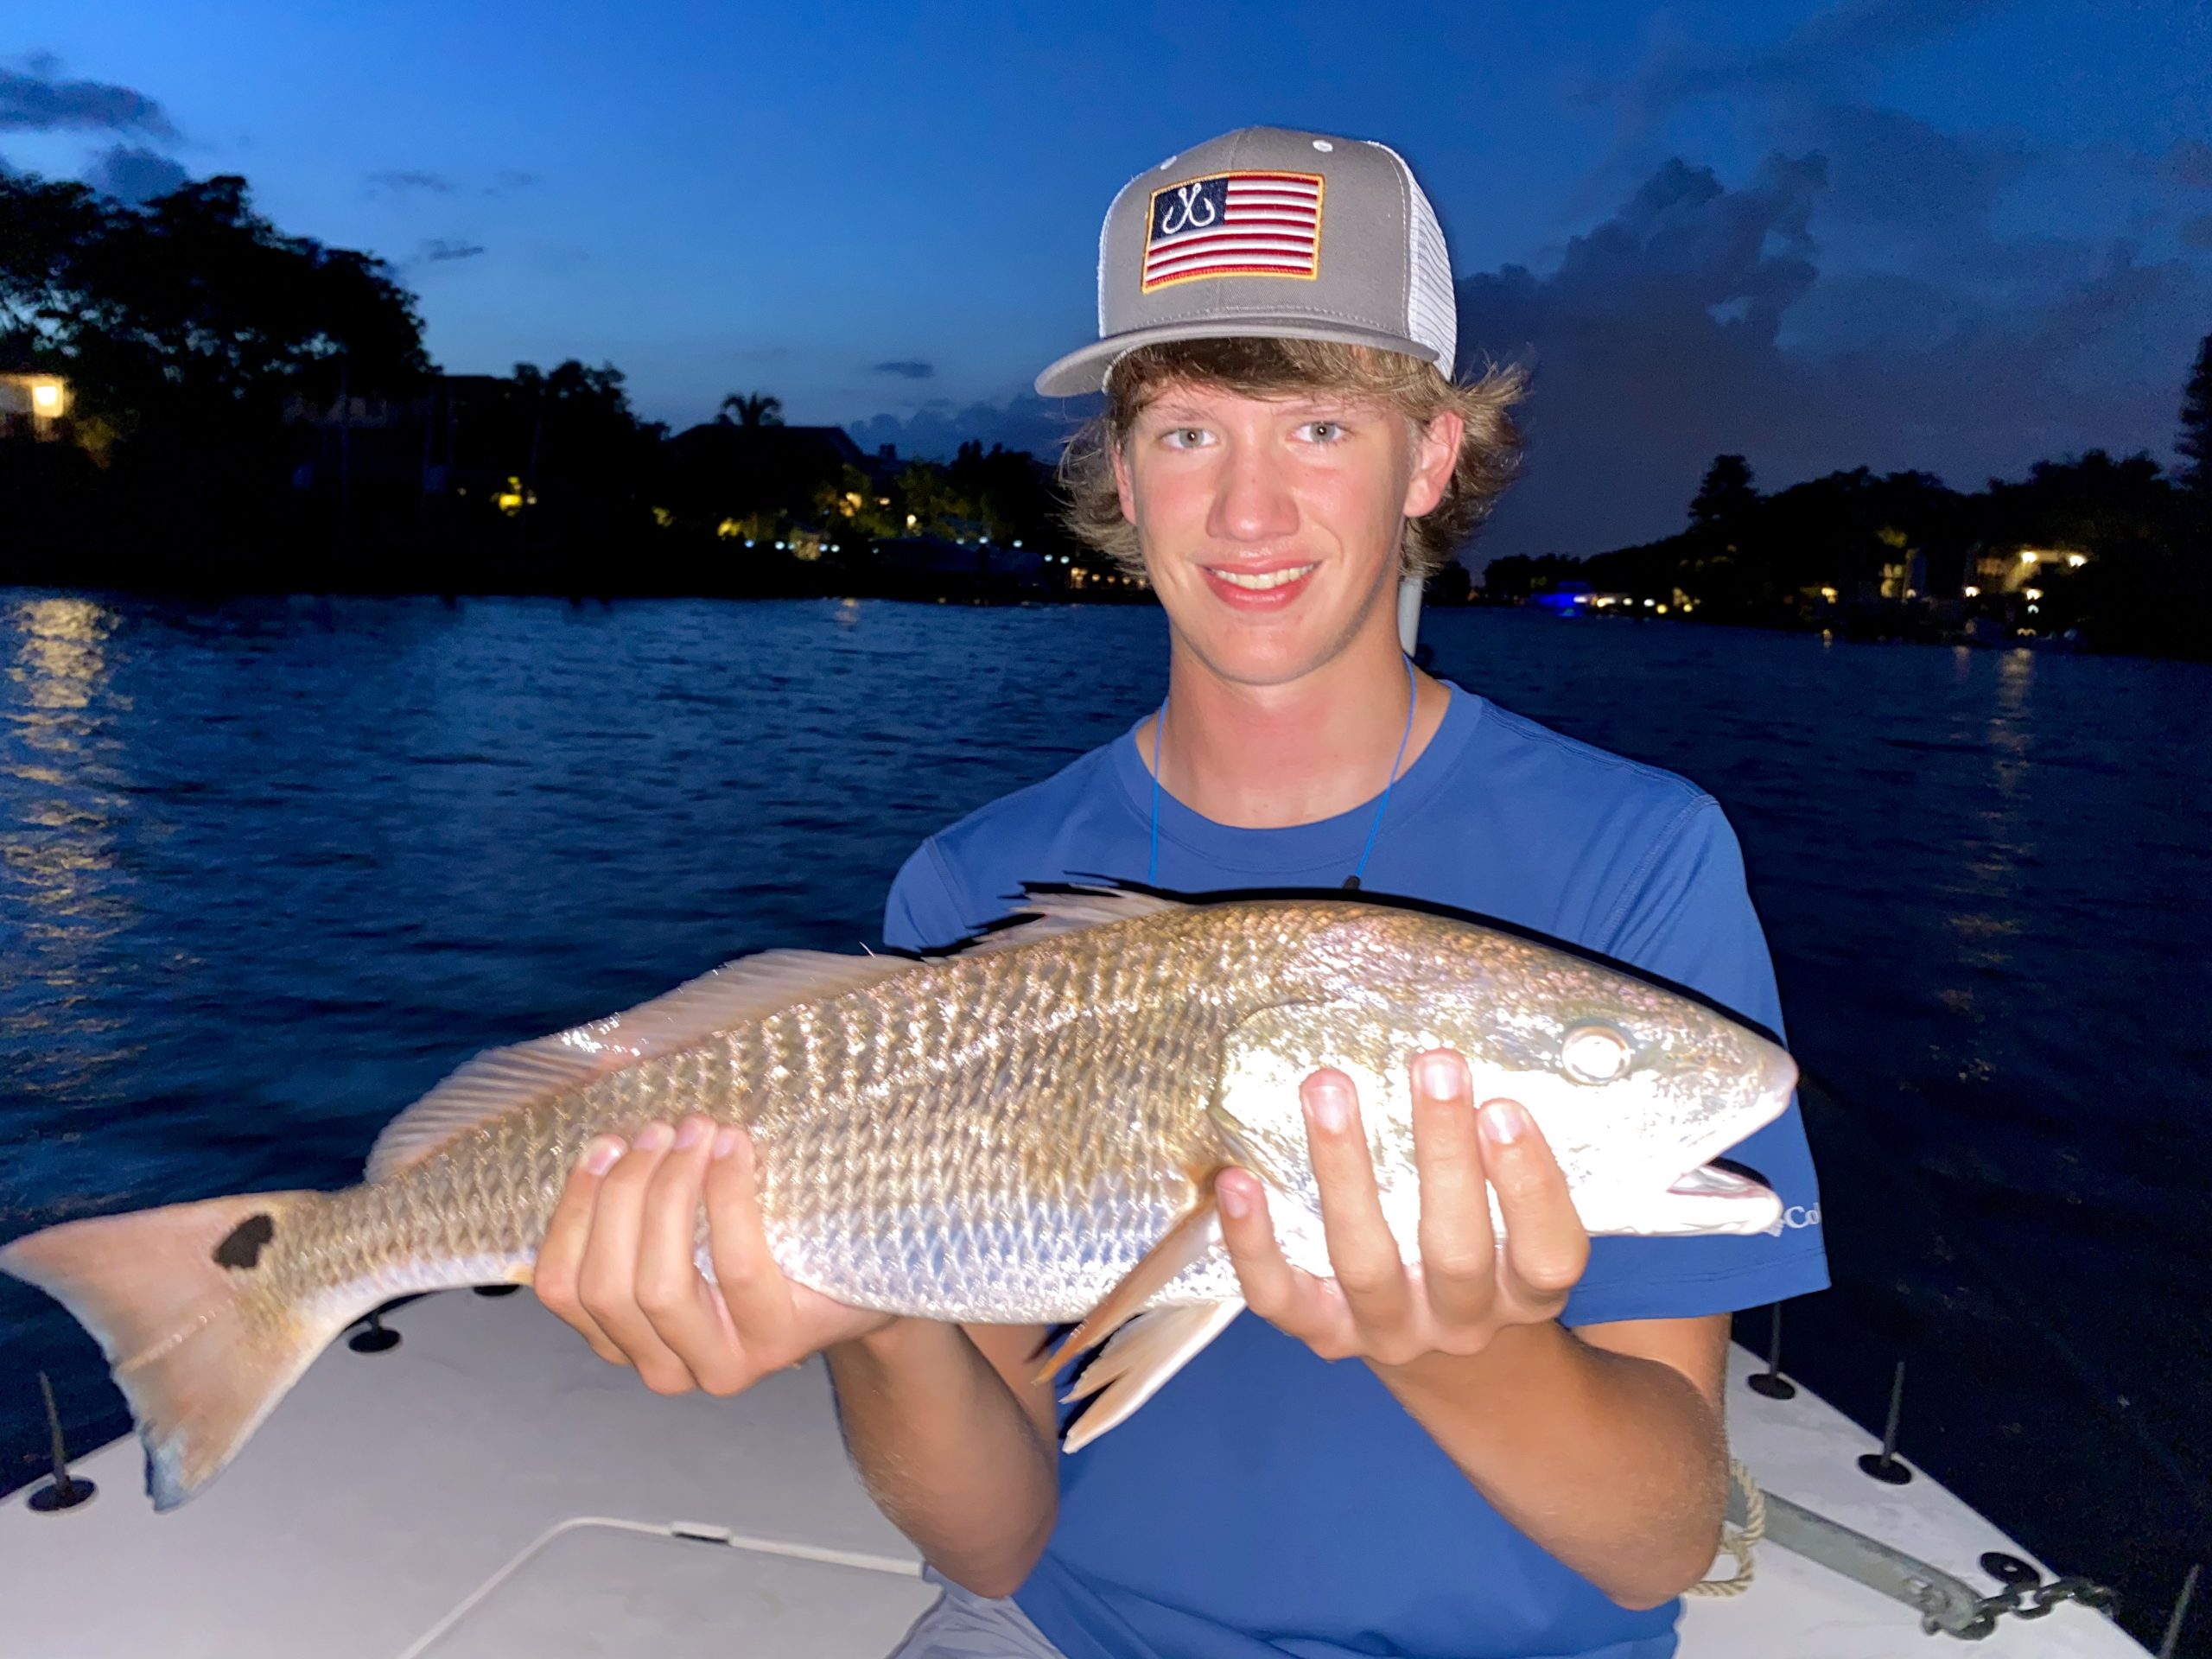 A young angler holds a redfish he caught just before dark